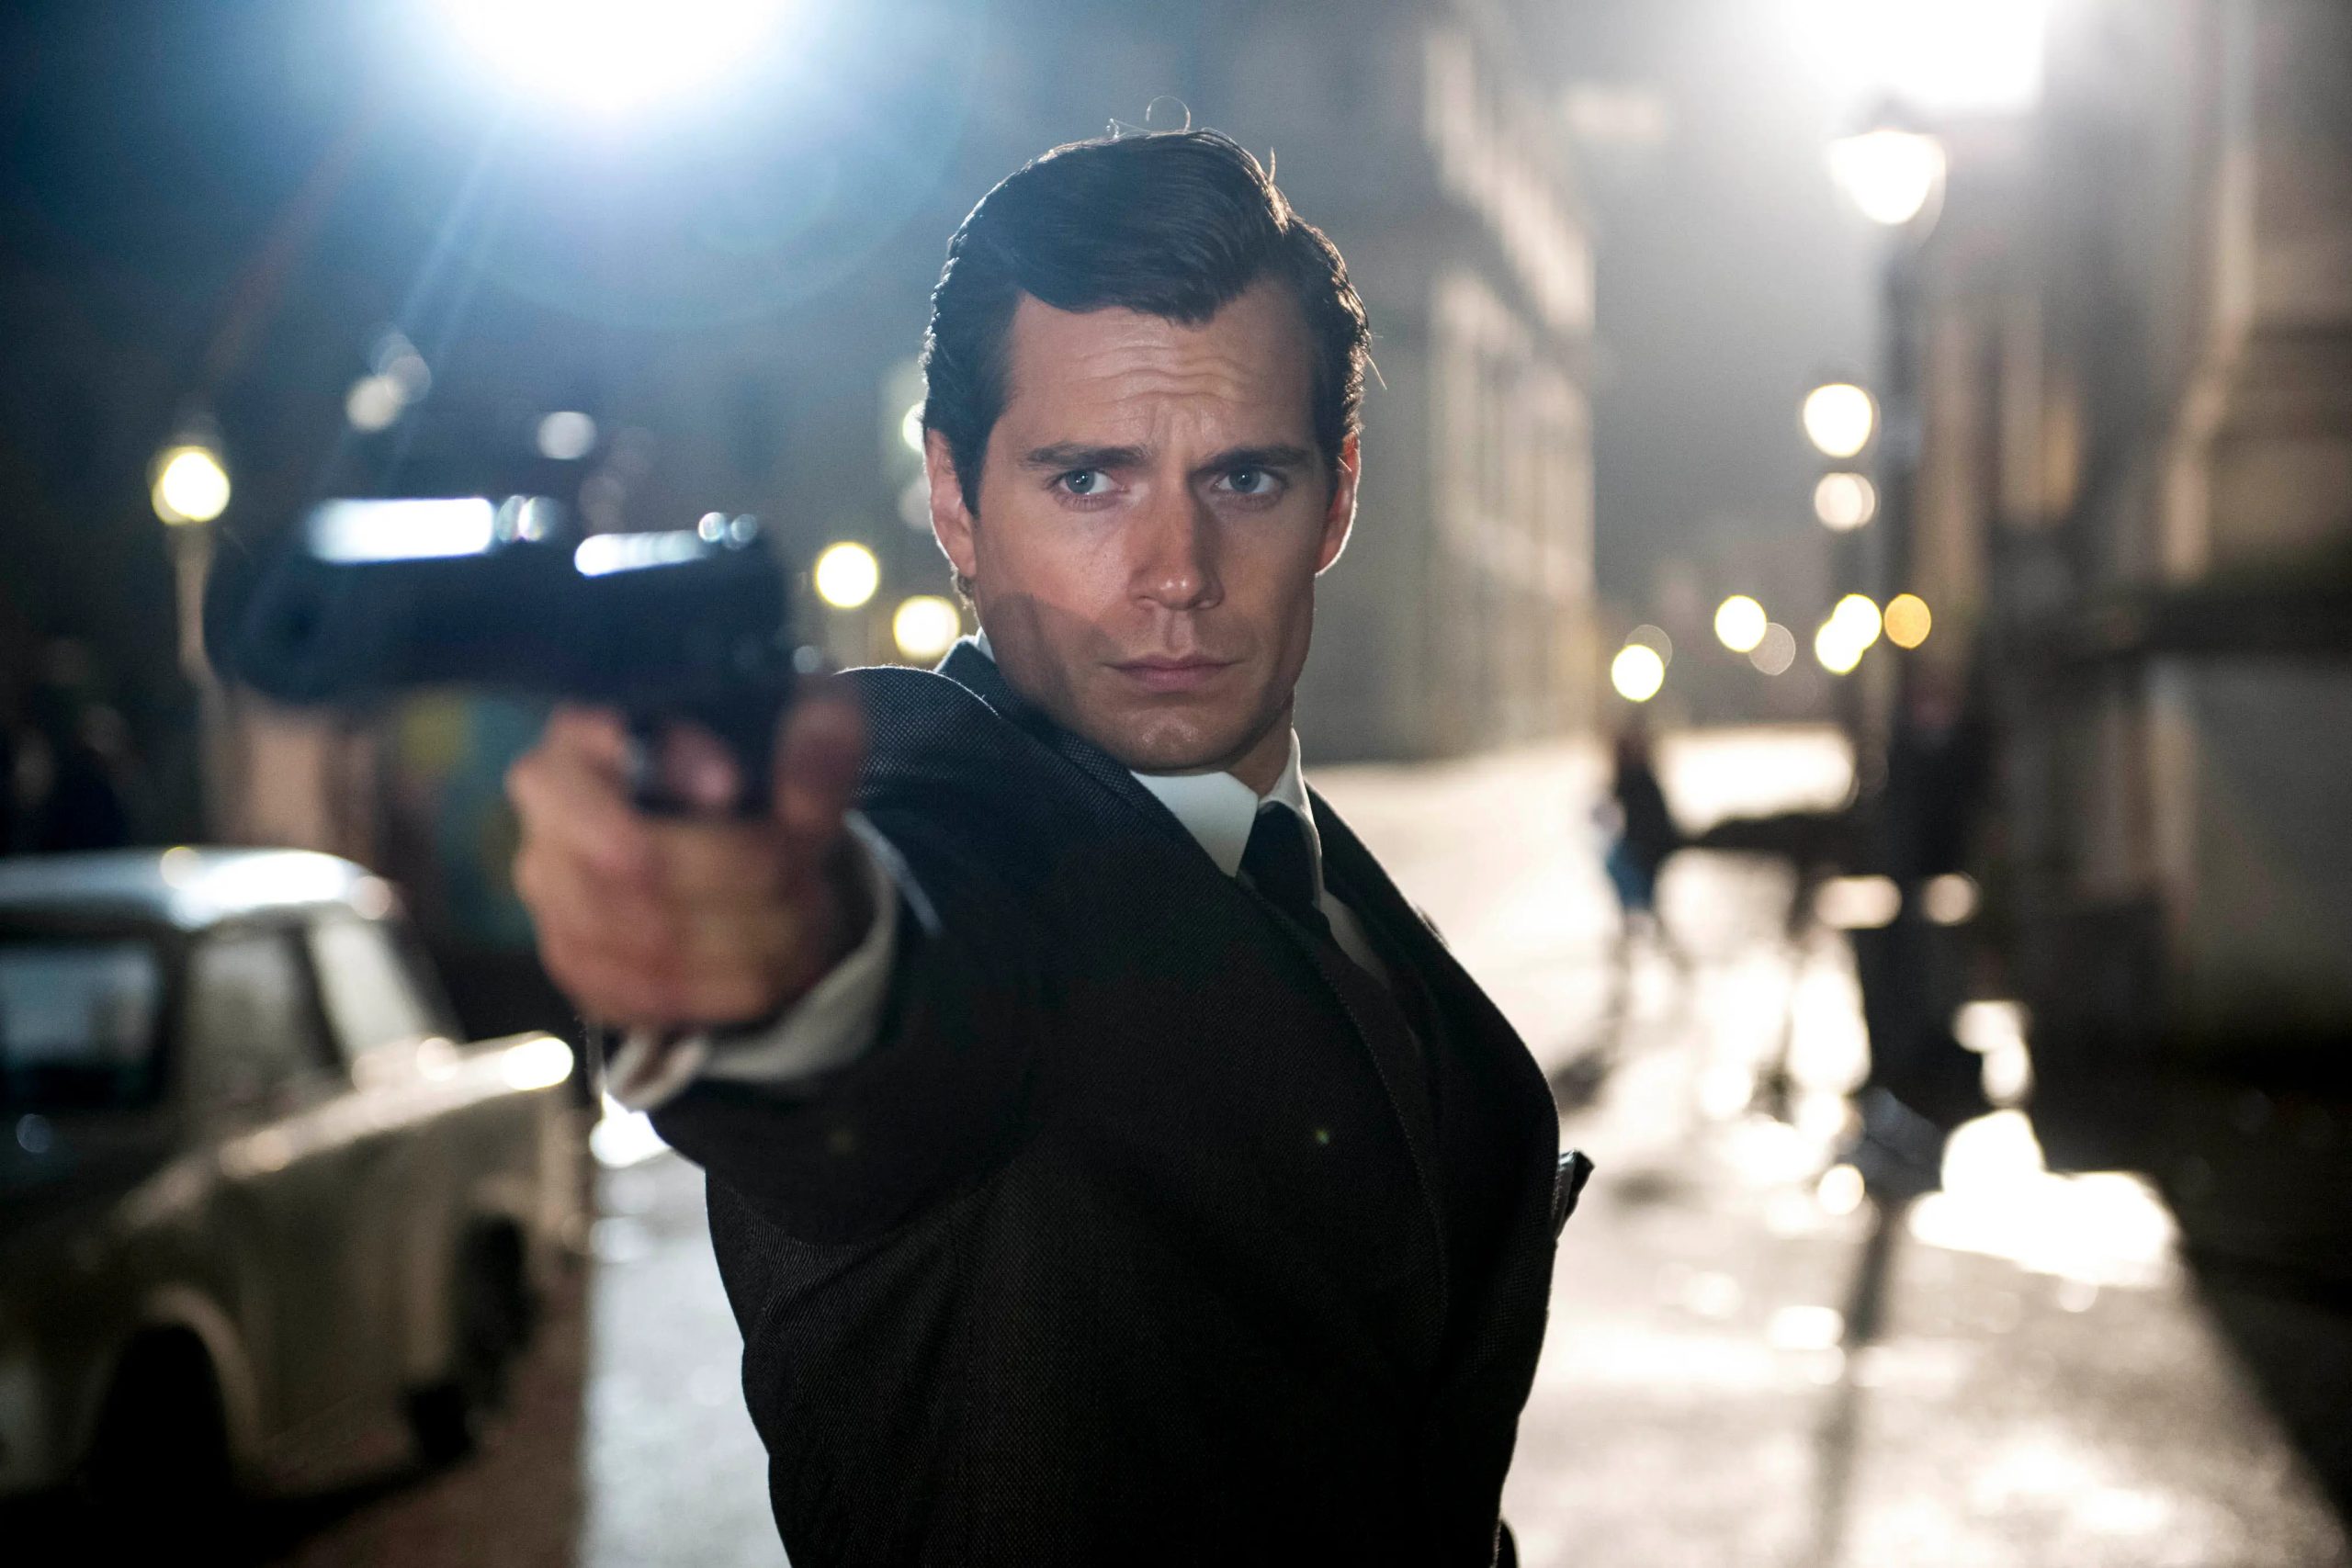 Henry Cavill in The Man from U.N.C.L.E. (2015)